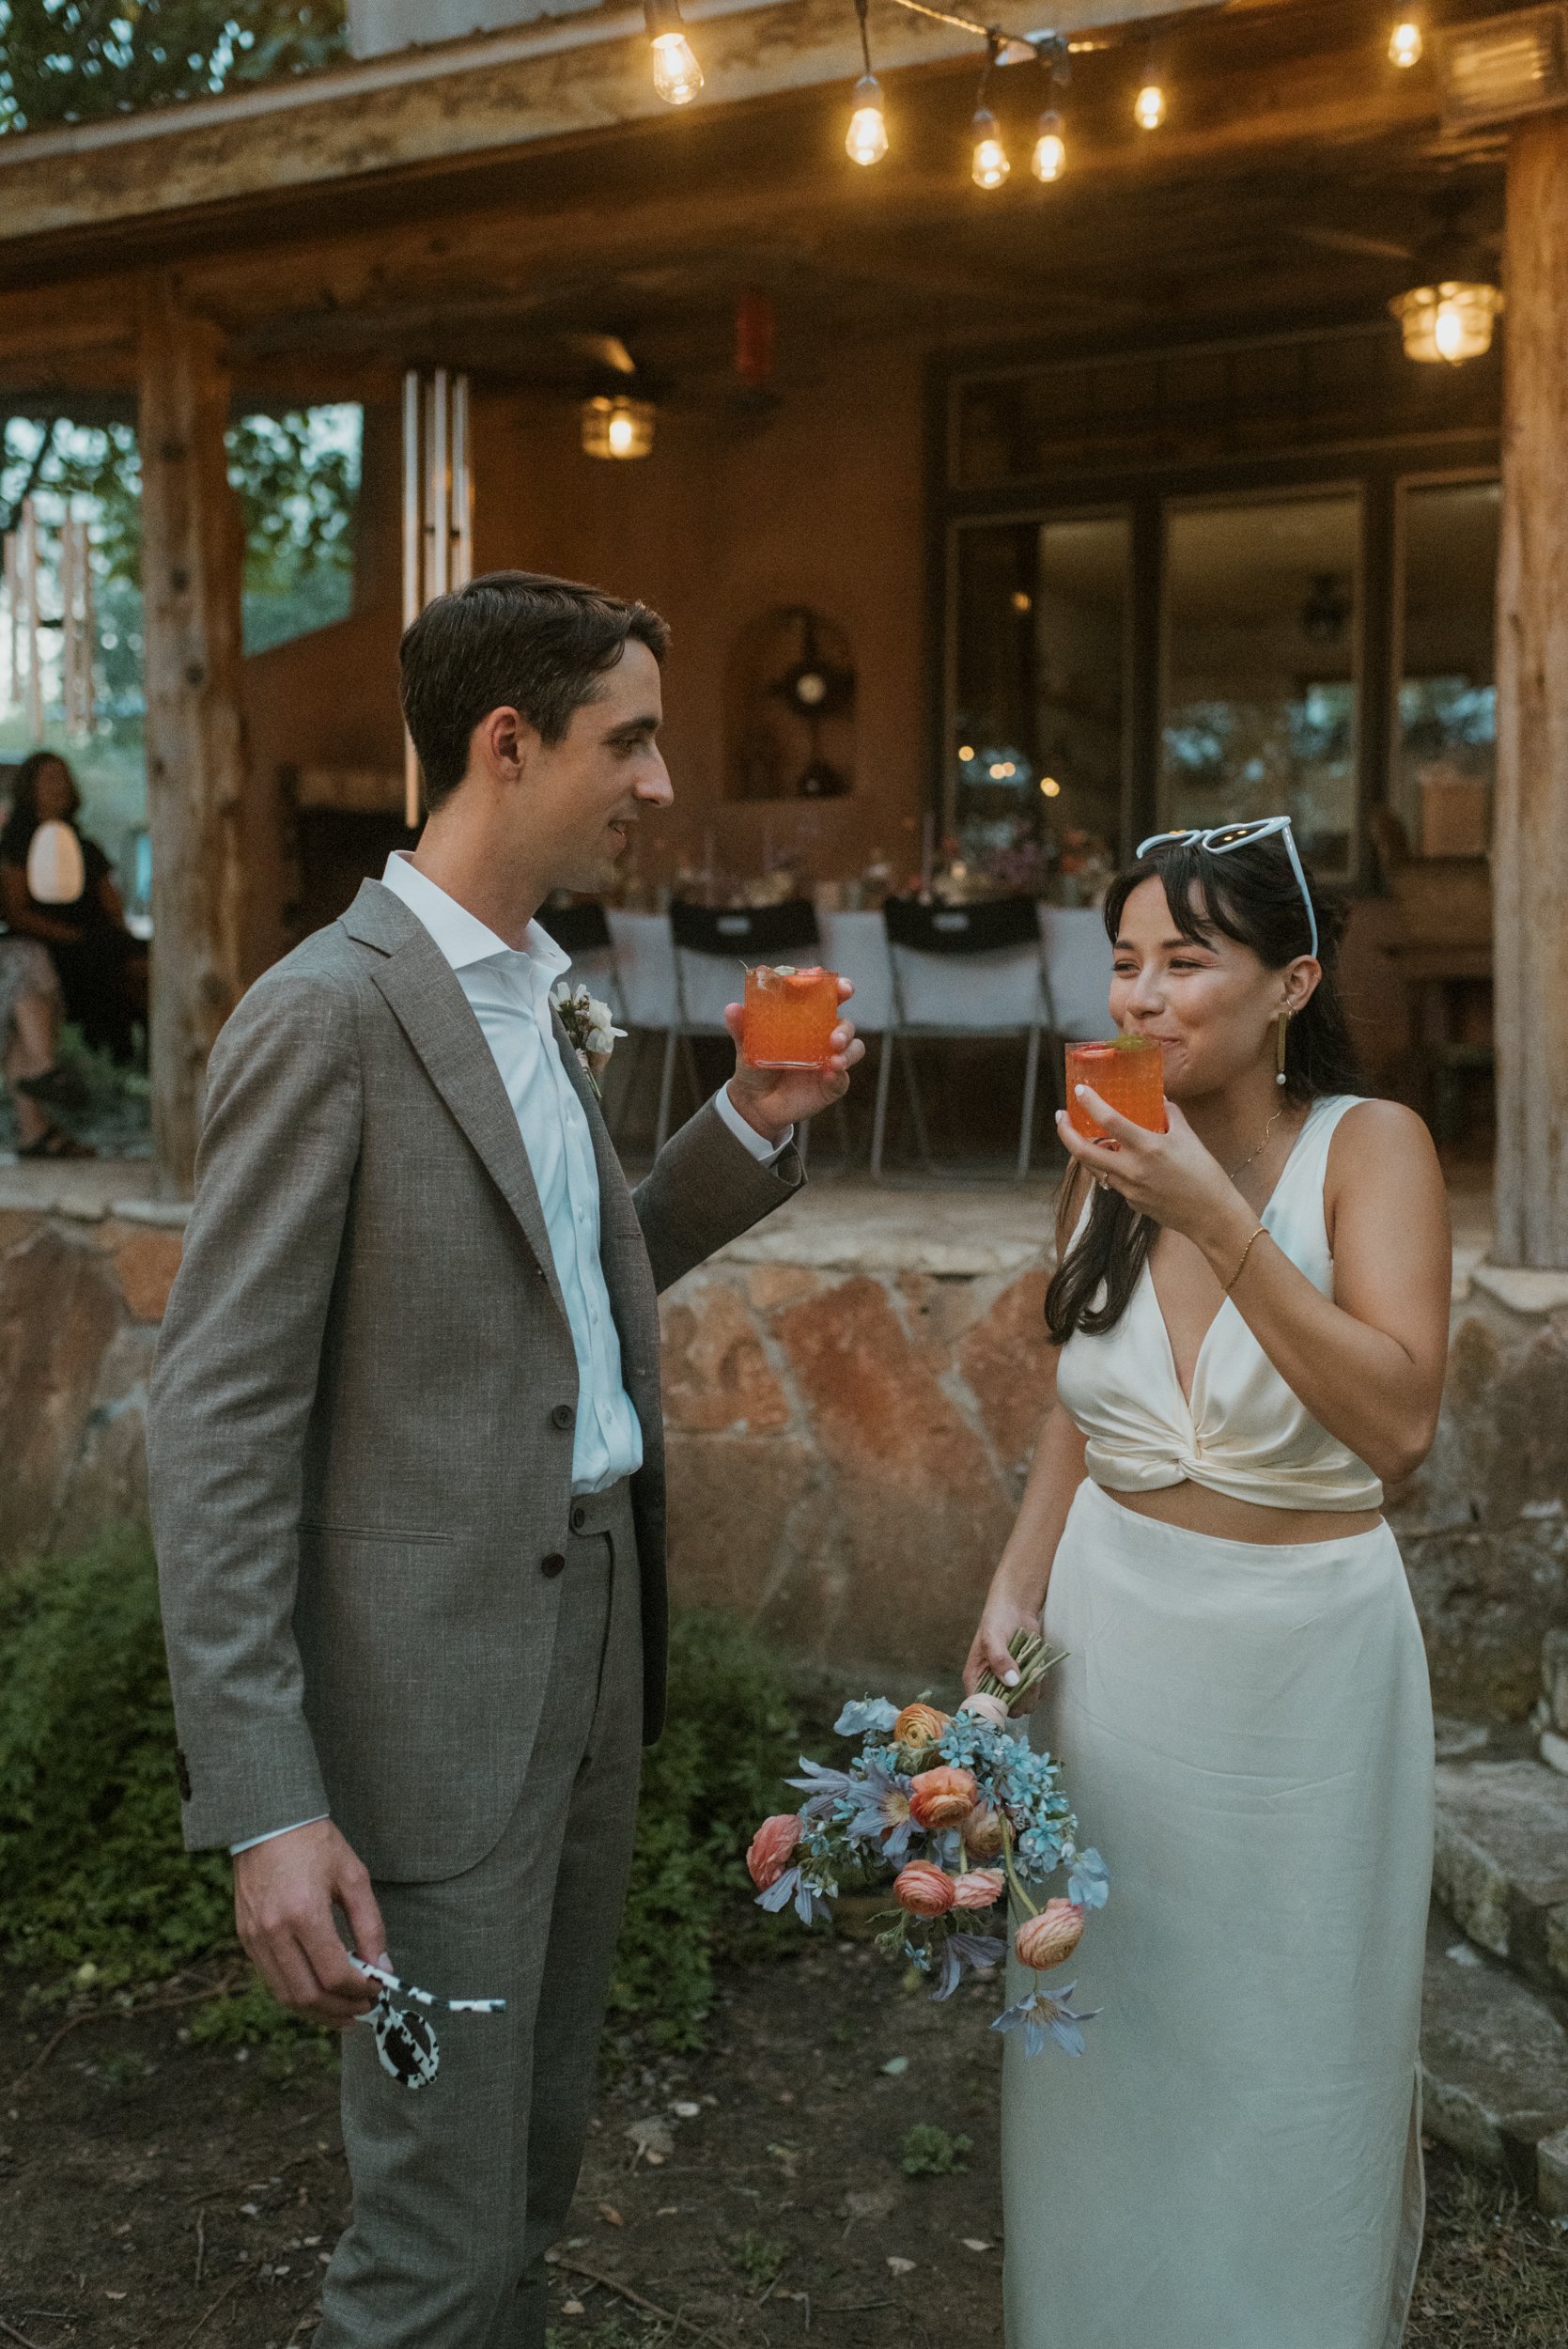 Austin All-Inclusive Small Wedding Photography Packages